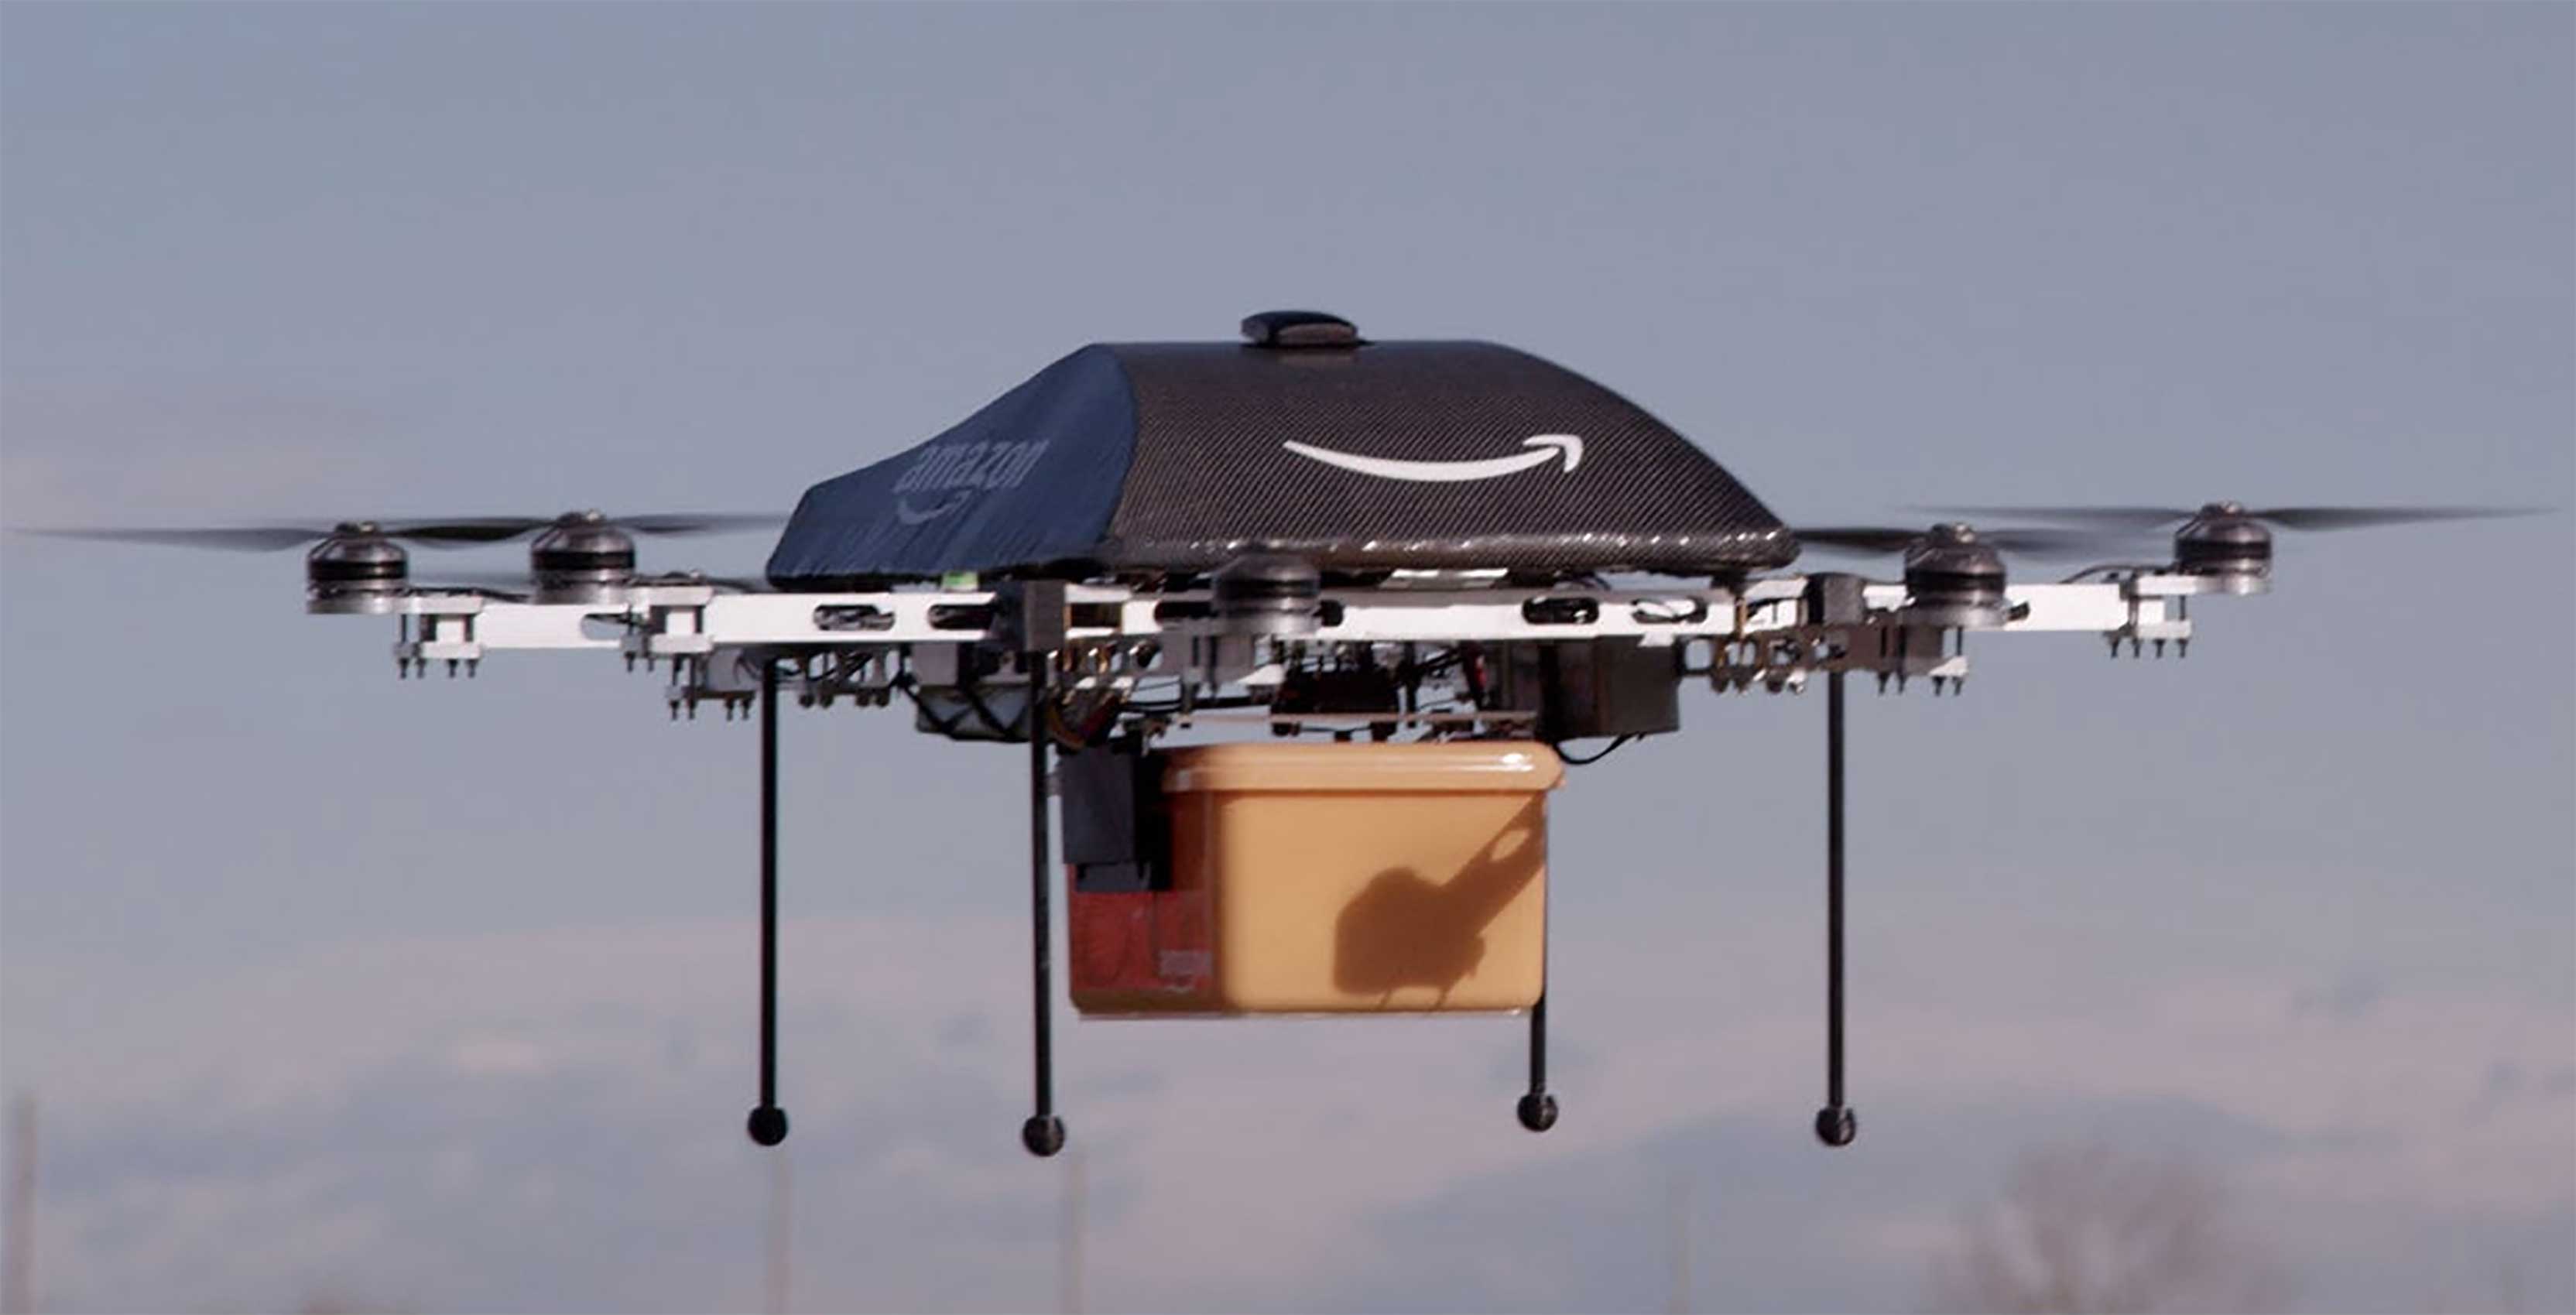 Amazon drone with package